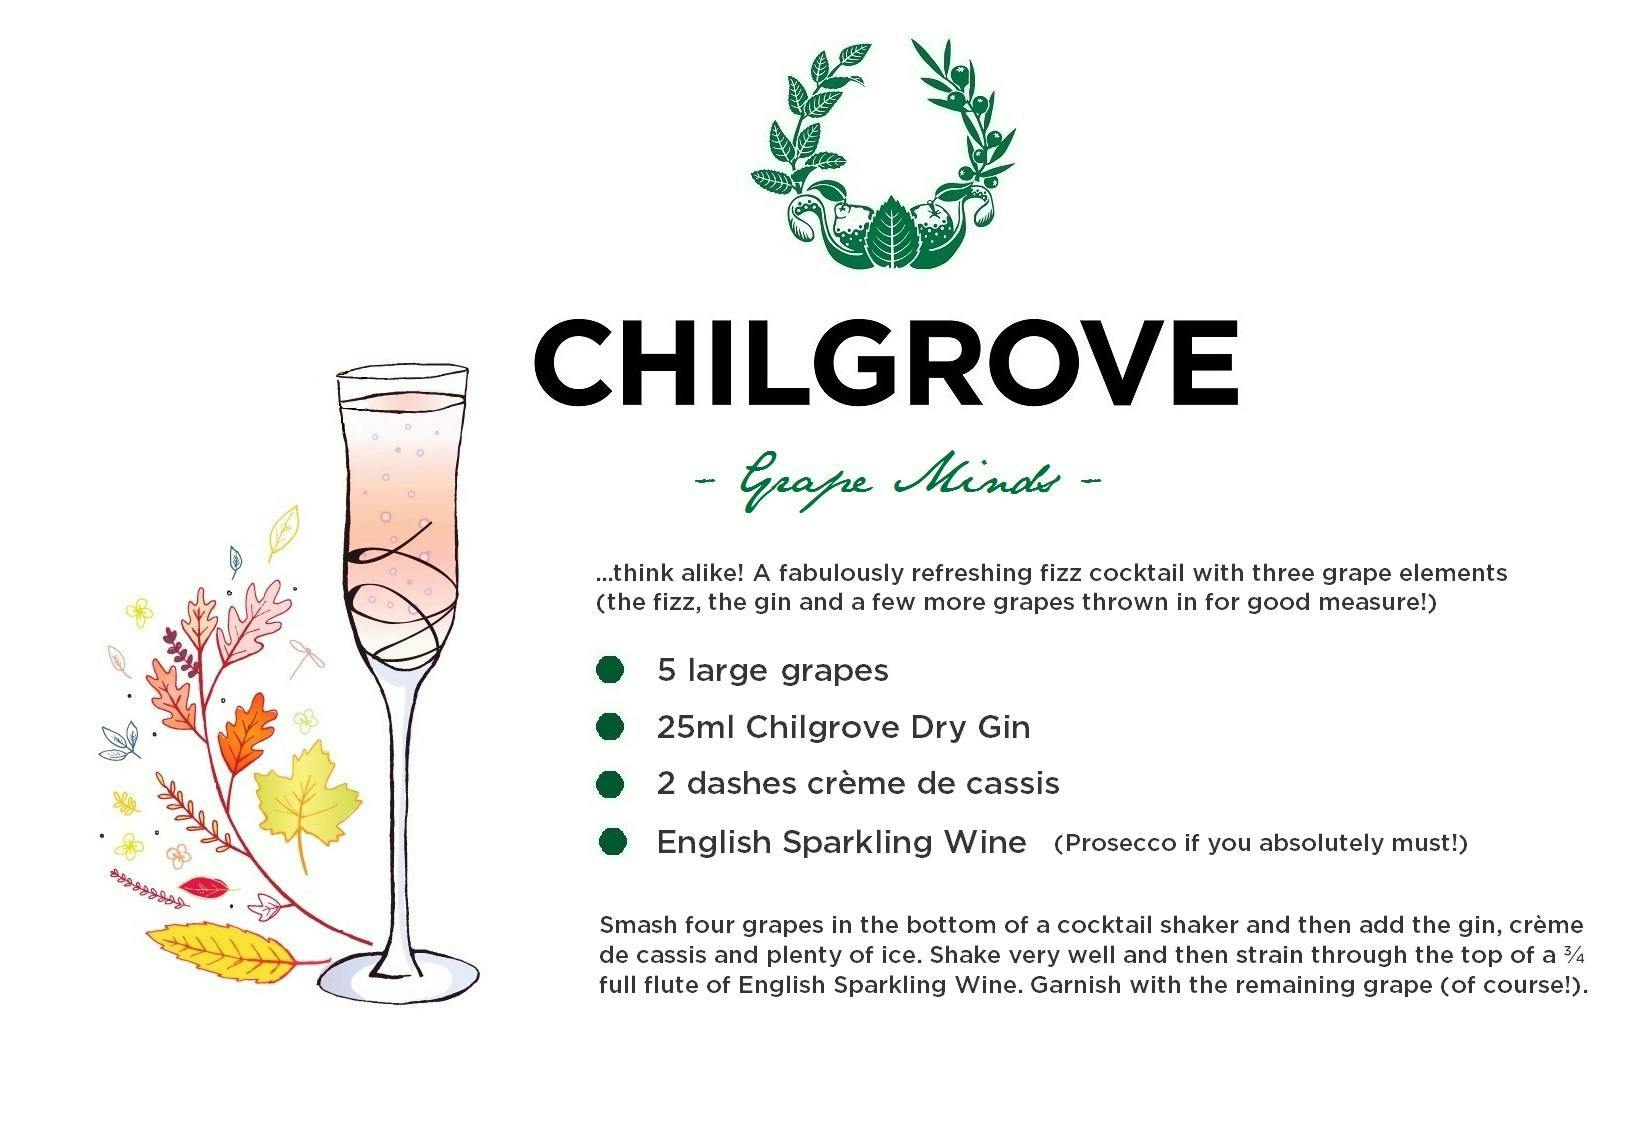 Cool off with this cold cocktail from the Little Ice Age and Chilgrove Dry Gin